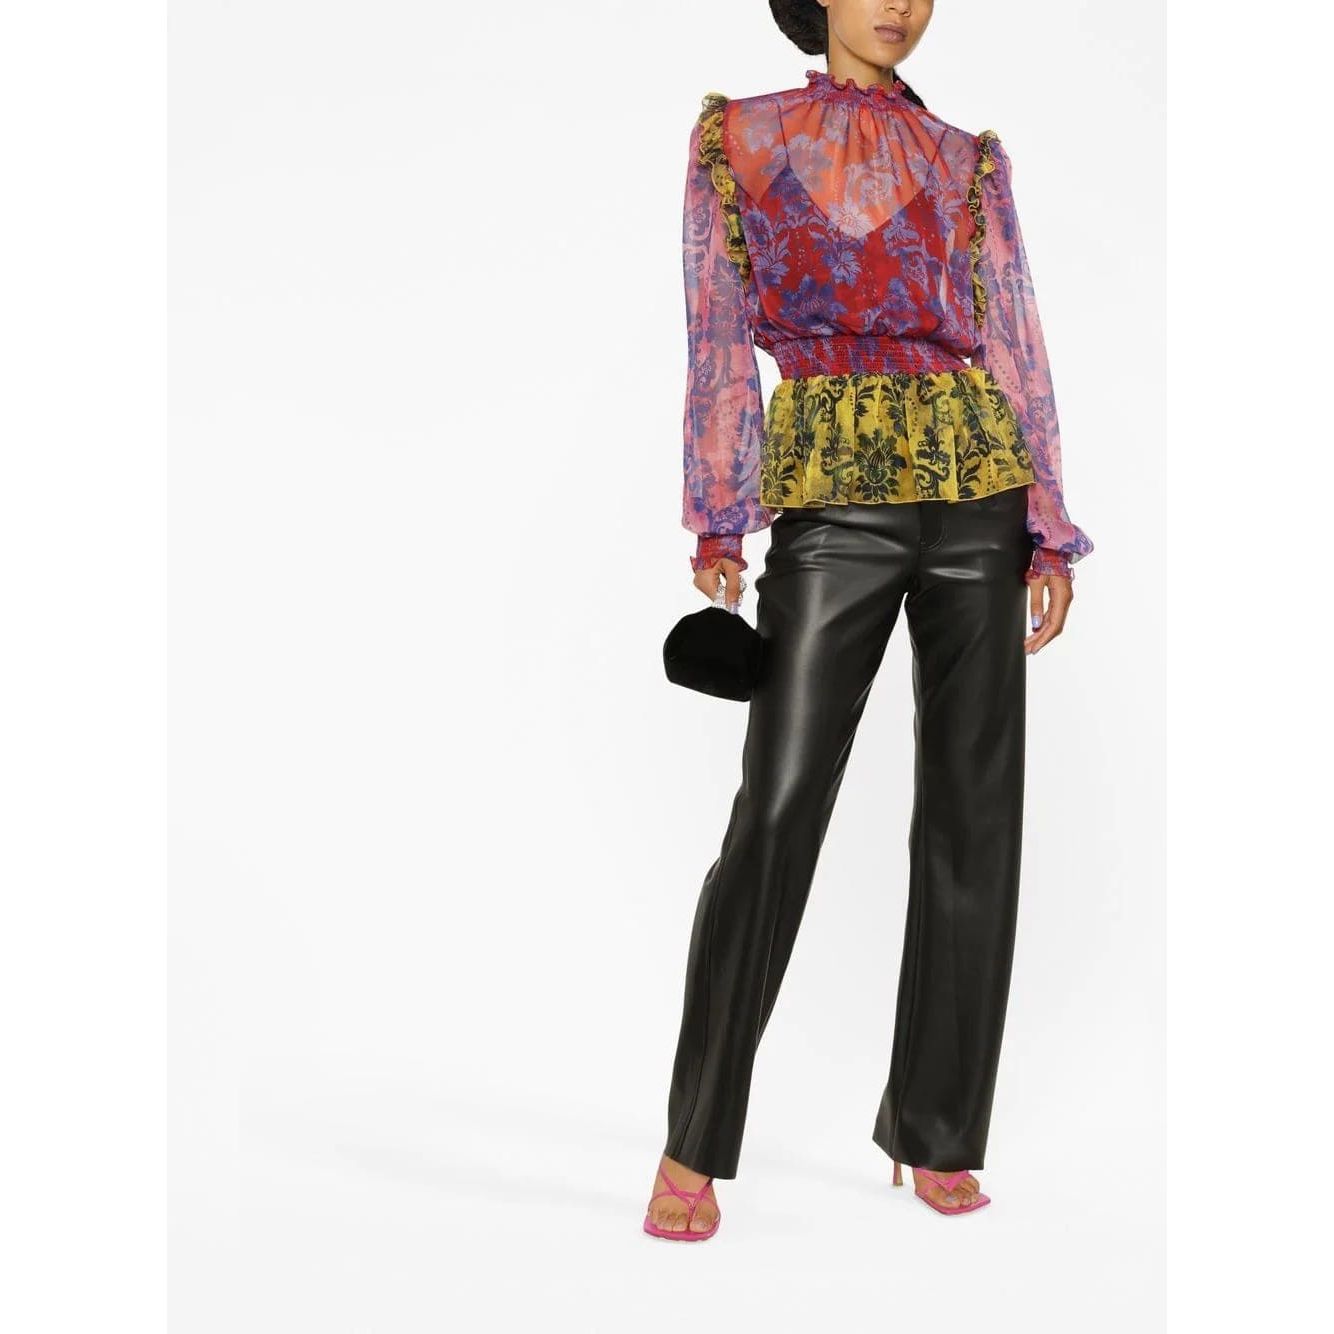 VERSACE JEANS COUTURE BLOUSE - Yooto